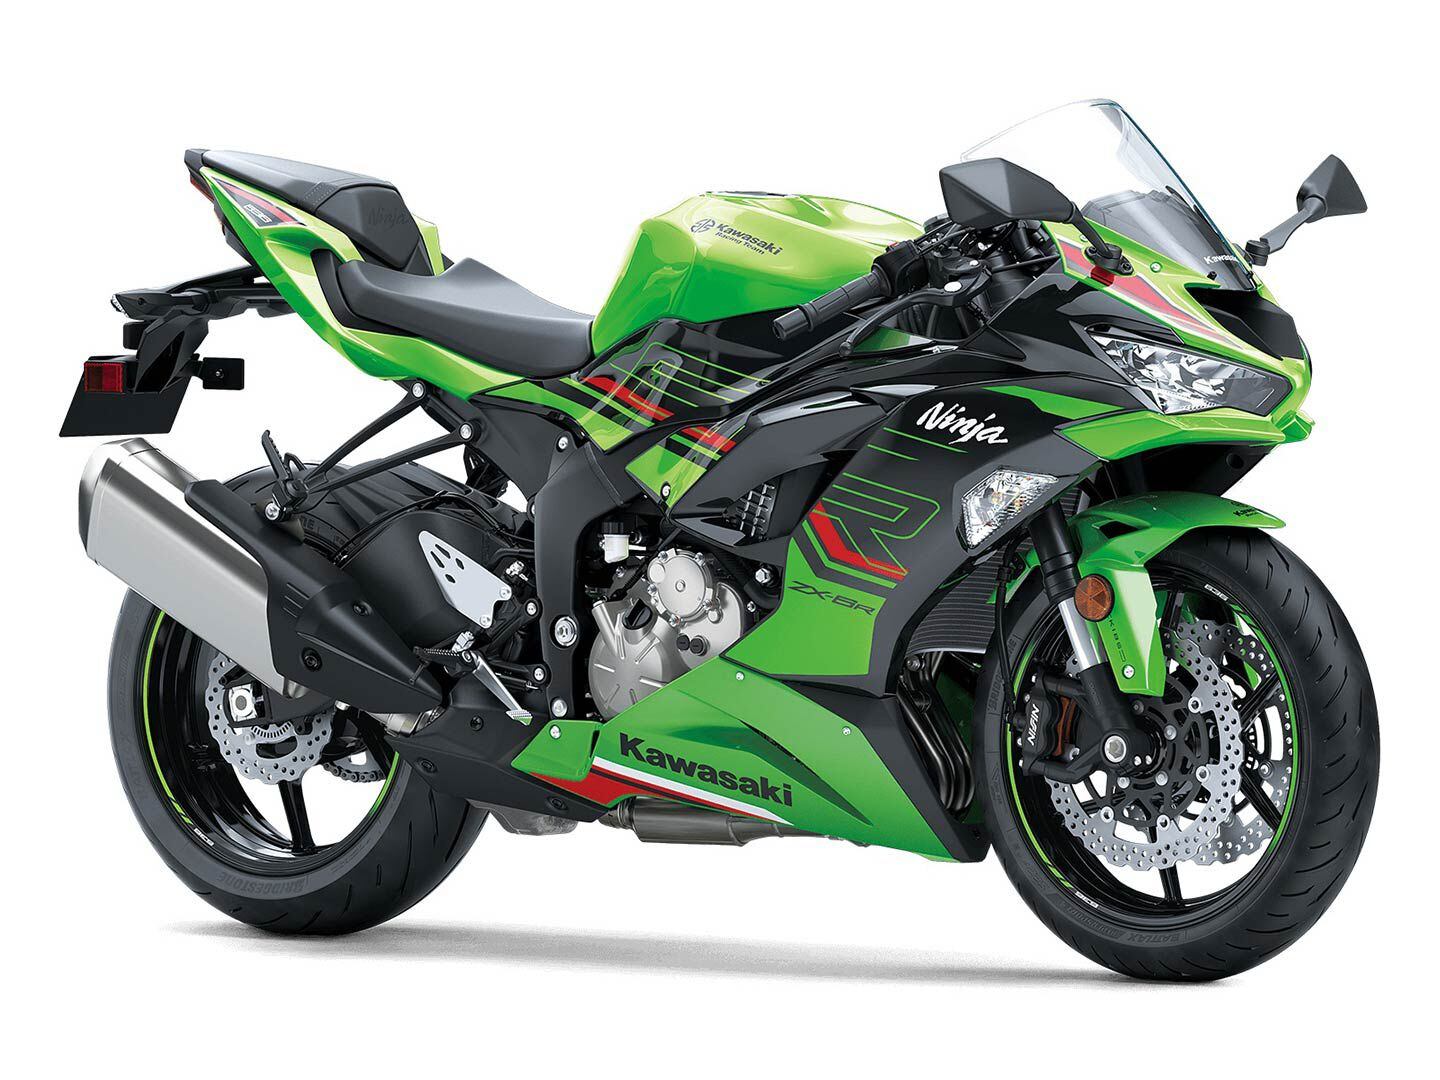 Kawasaki’s ZX-6R has been on life support, already pulled off the market across Europe, but changes to meet Euro 5 standards may just ensure its future, at least for a little while.